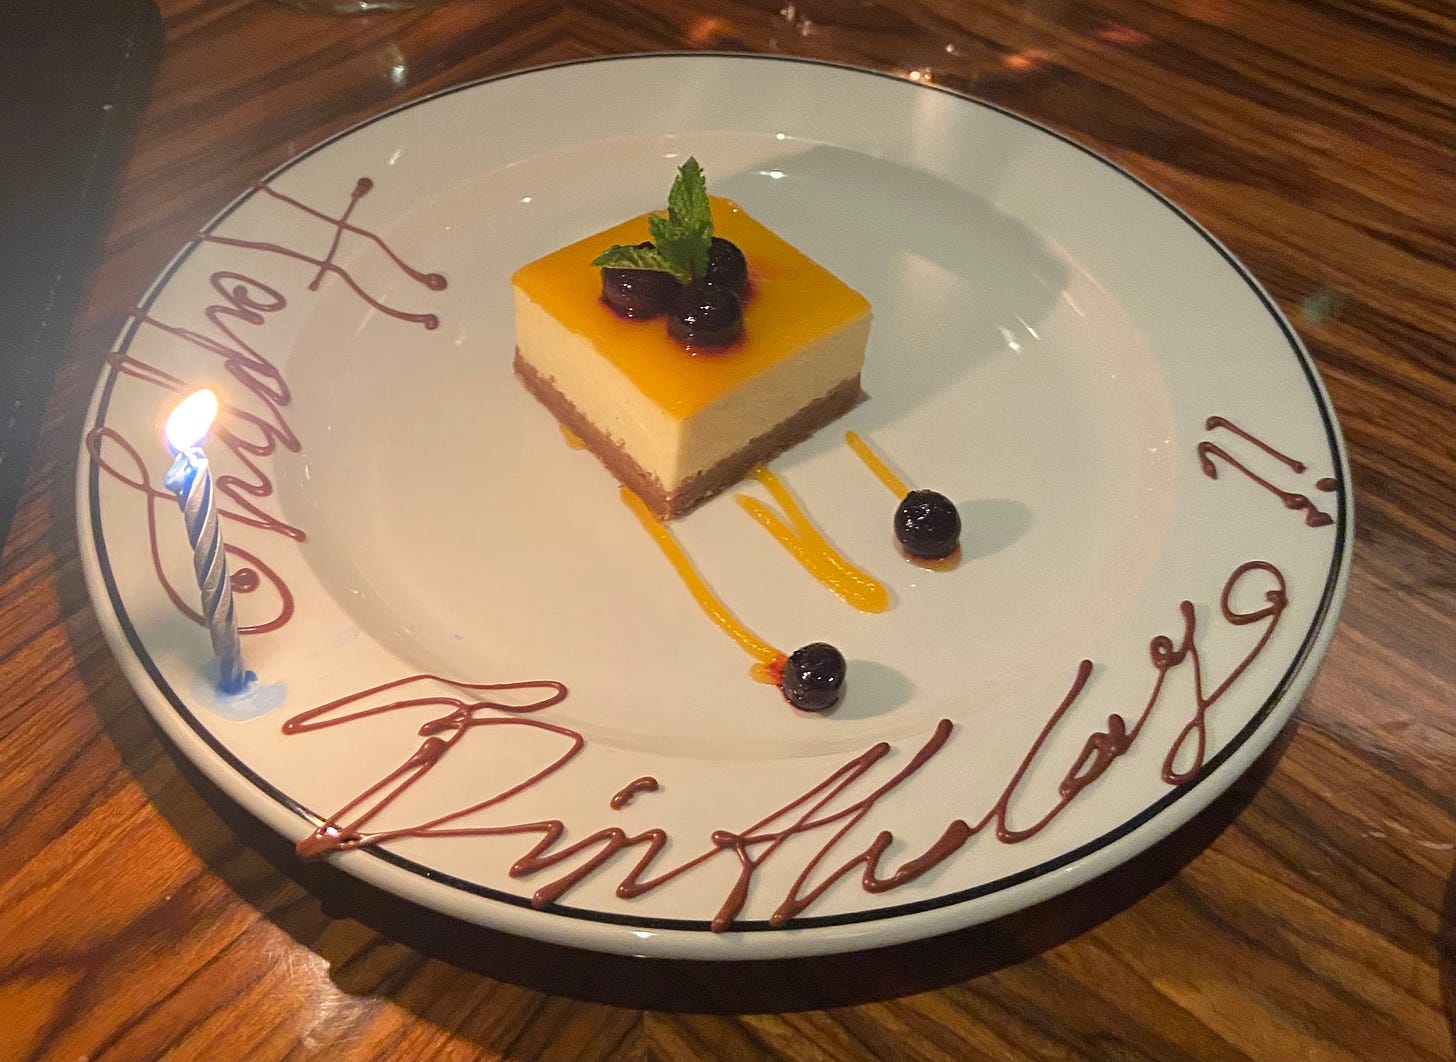 Cheesecake with Happy Birthday written on the plate in chocolate.